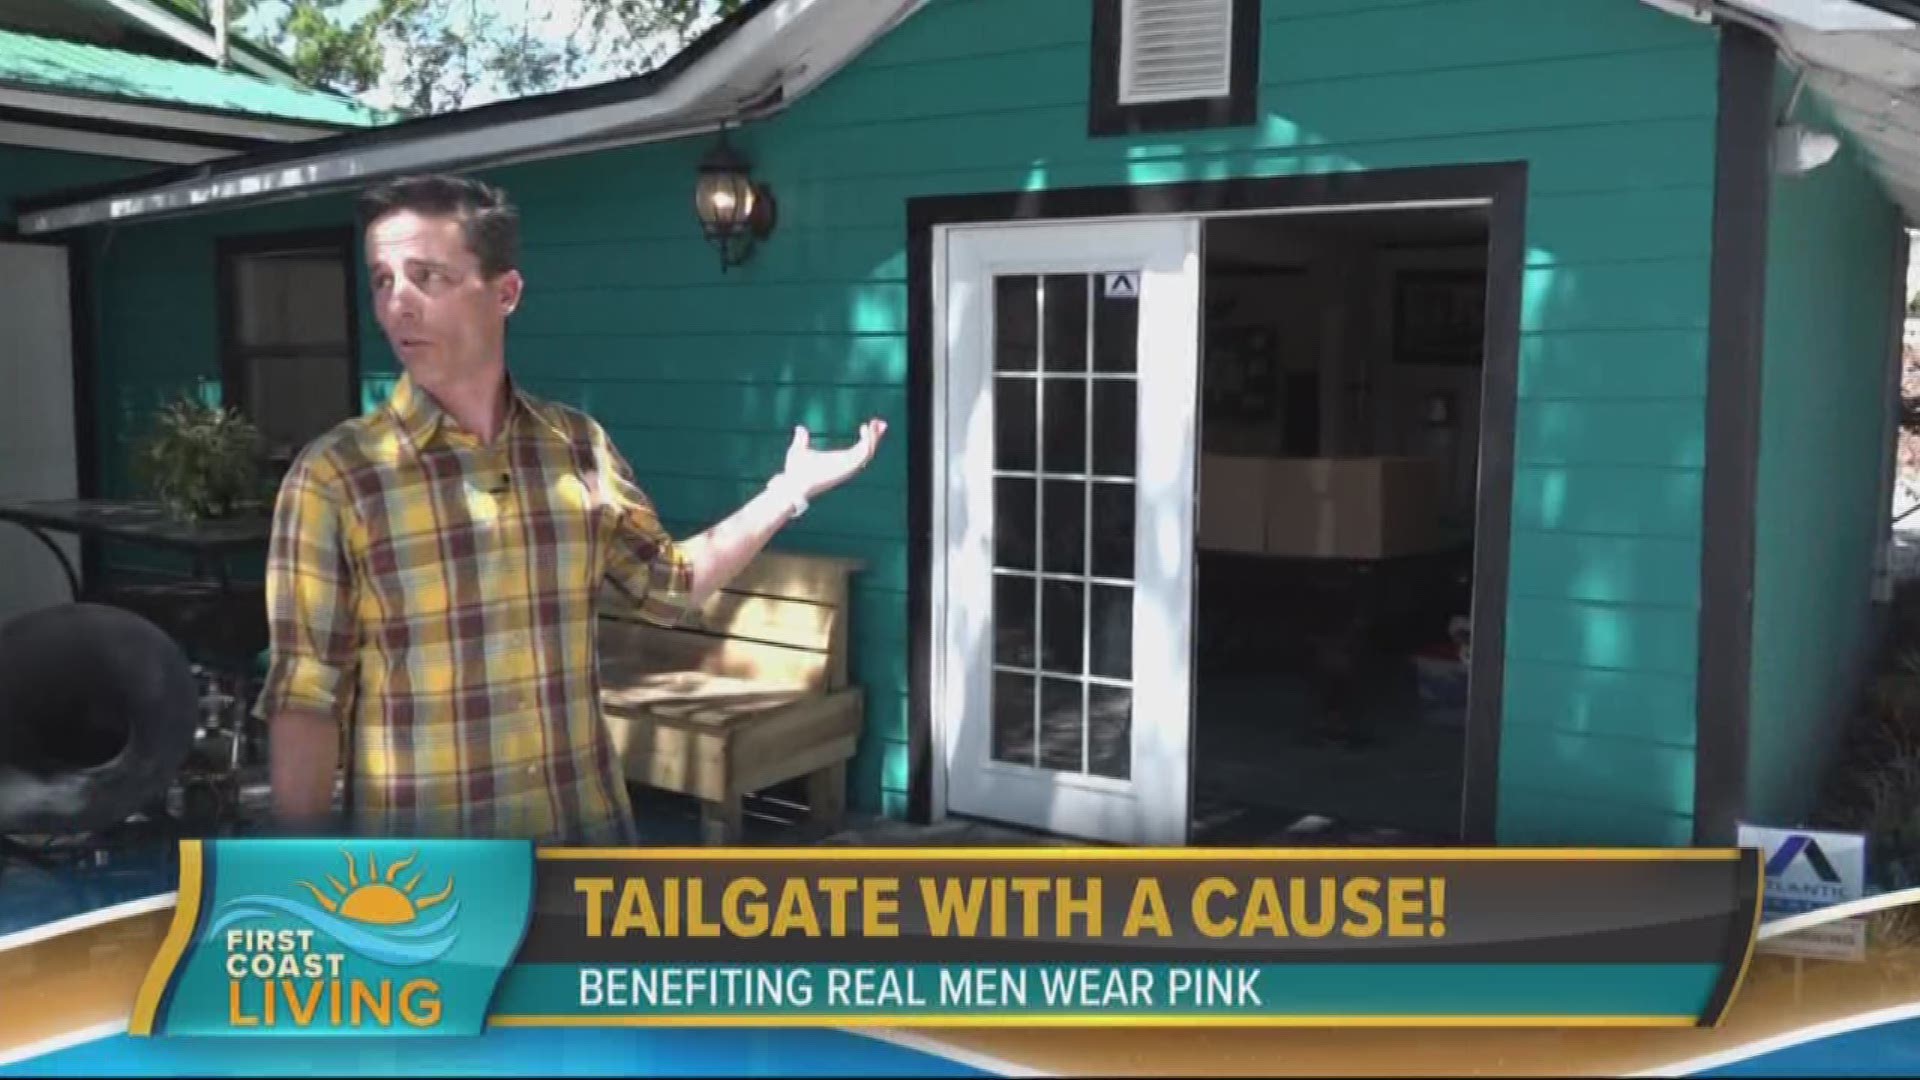 The Duuuval House is giving fans a chance to tailgate for a good cause on game day!